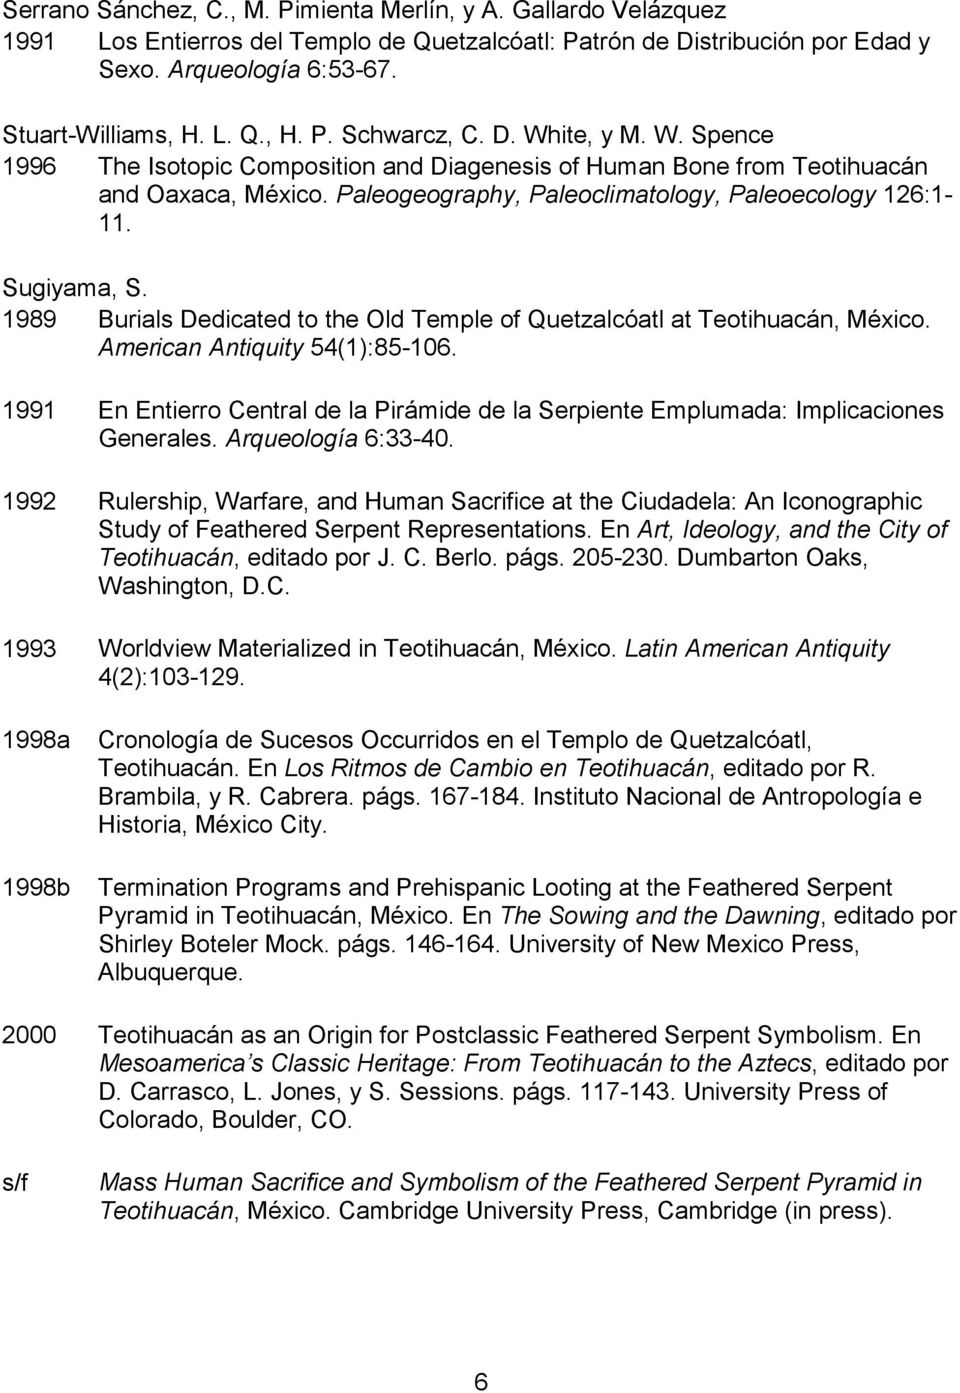 1989 Burials Dedicated to the Old Temple of Quetzalcóatl at Teotihuacán, México. American Antiquity 54(1):85-106.